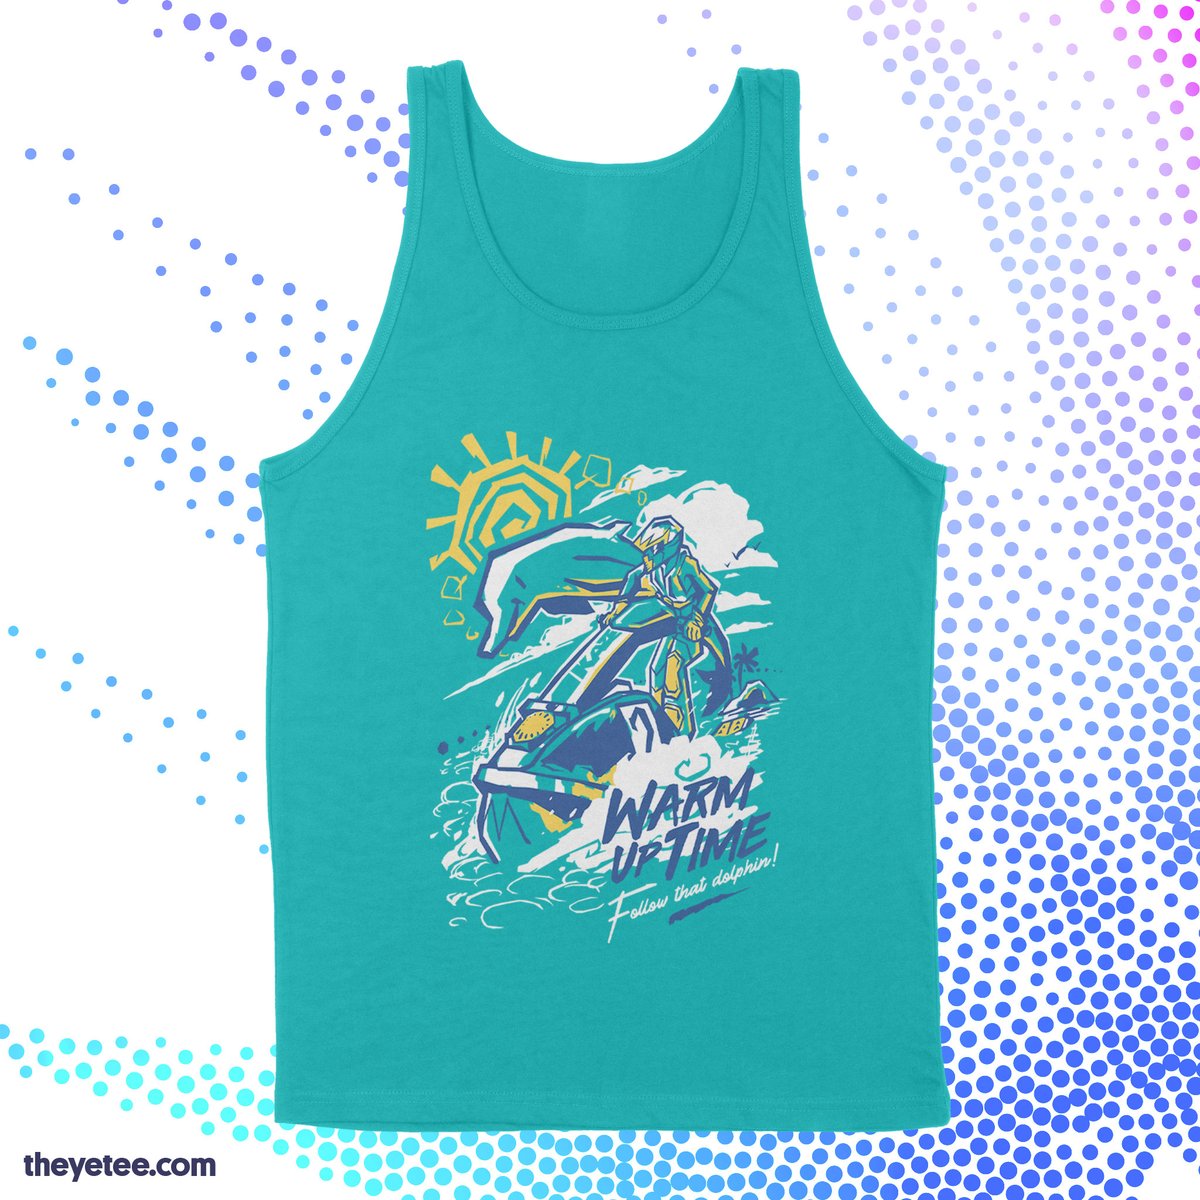 「Rev up those dolphins, racers! Designed 」|The Yetee 🌈のイラスト